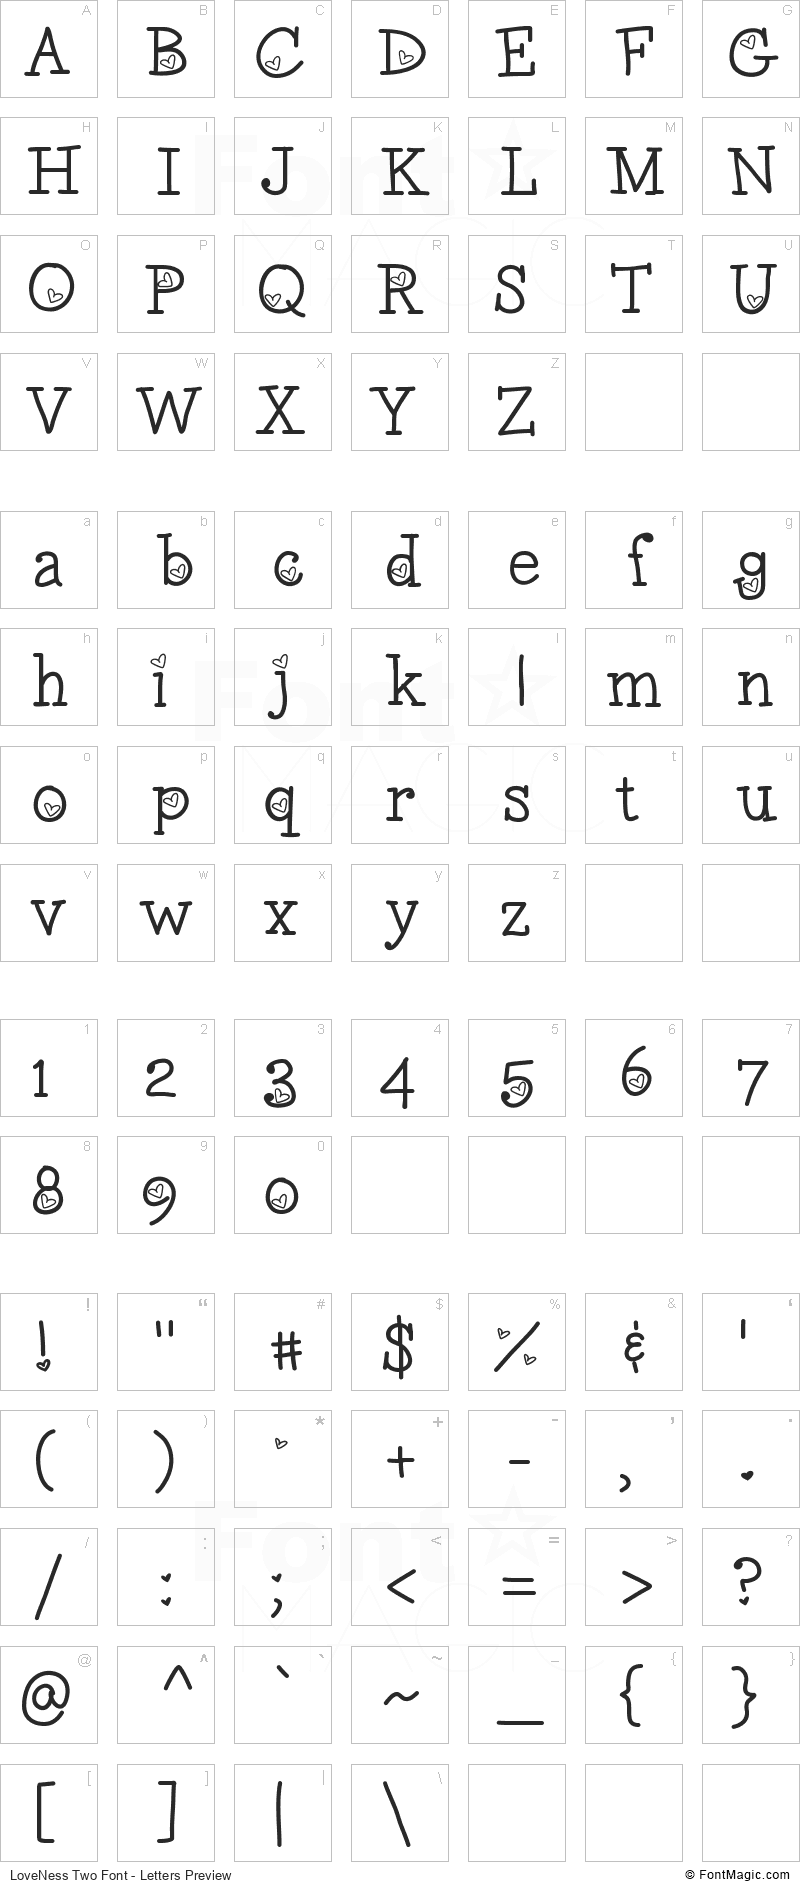 LoveNess Two Font - All Latters Preview Chart